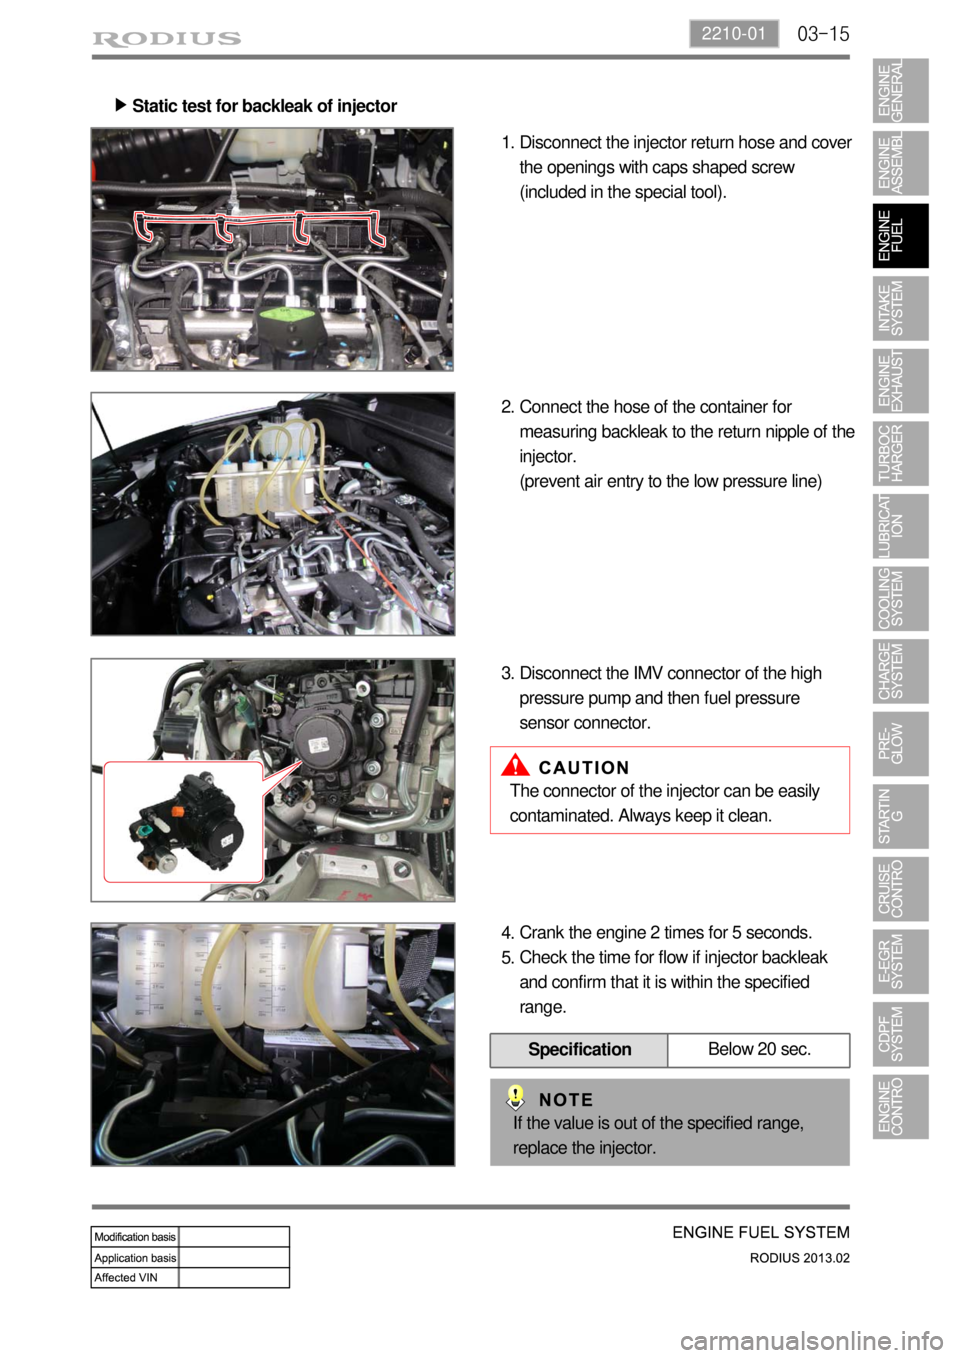 SSANGYONG TURISMO 2013  Service Manual 03-152210-01
Static test for backleak of injector ▶
Disconnect the injector return hose and cover 
the openings with caps shaped screw 
(included in the special tool). 1.
Connect the hose of the con